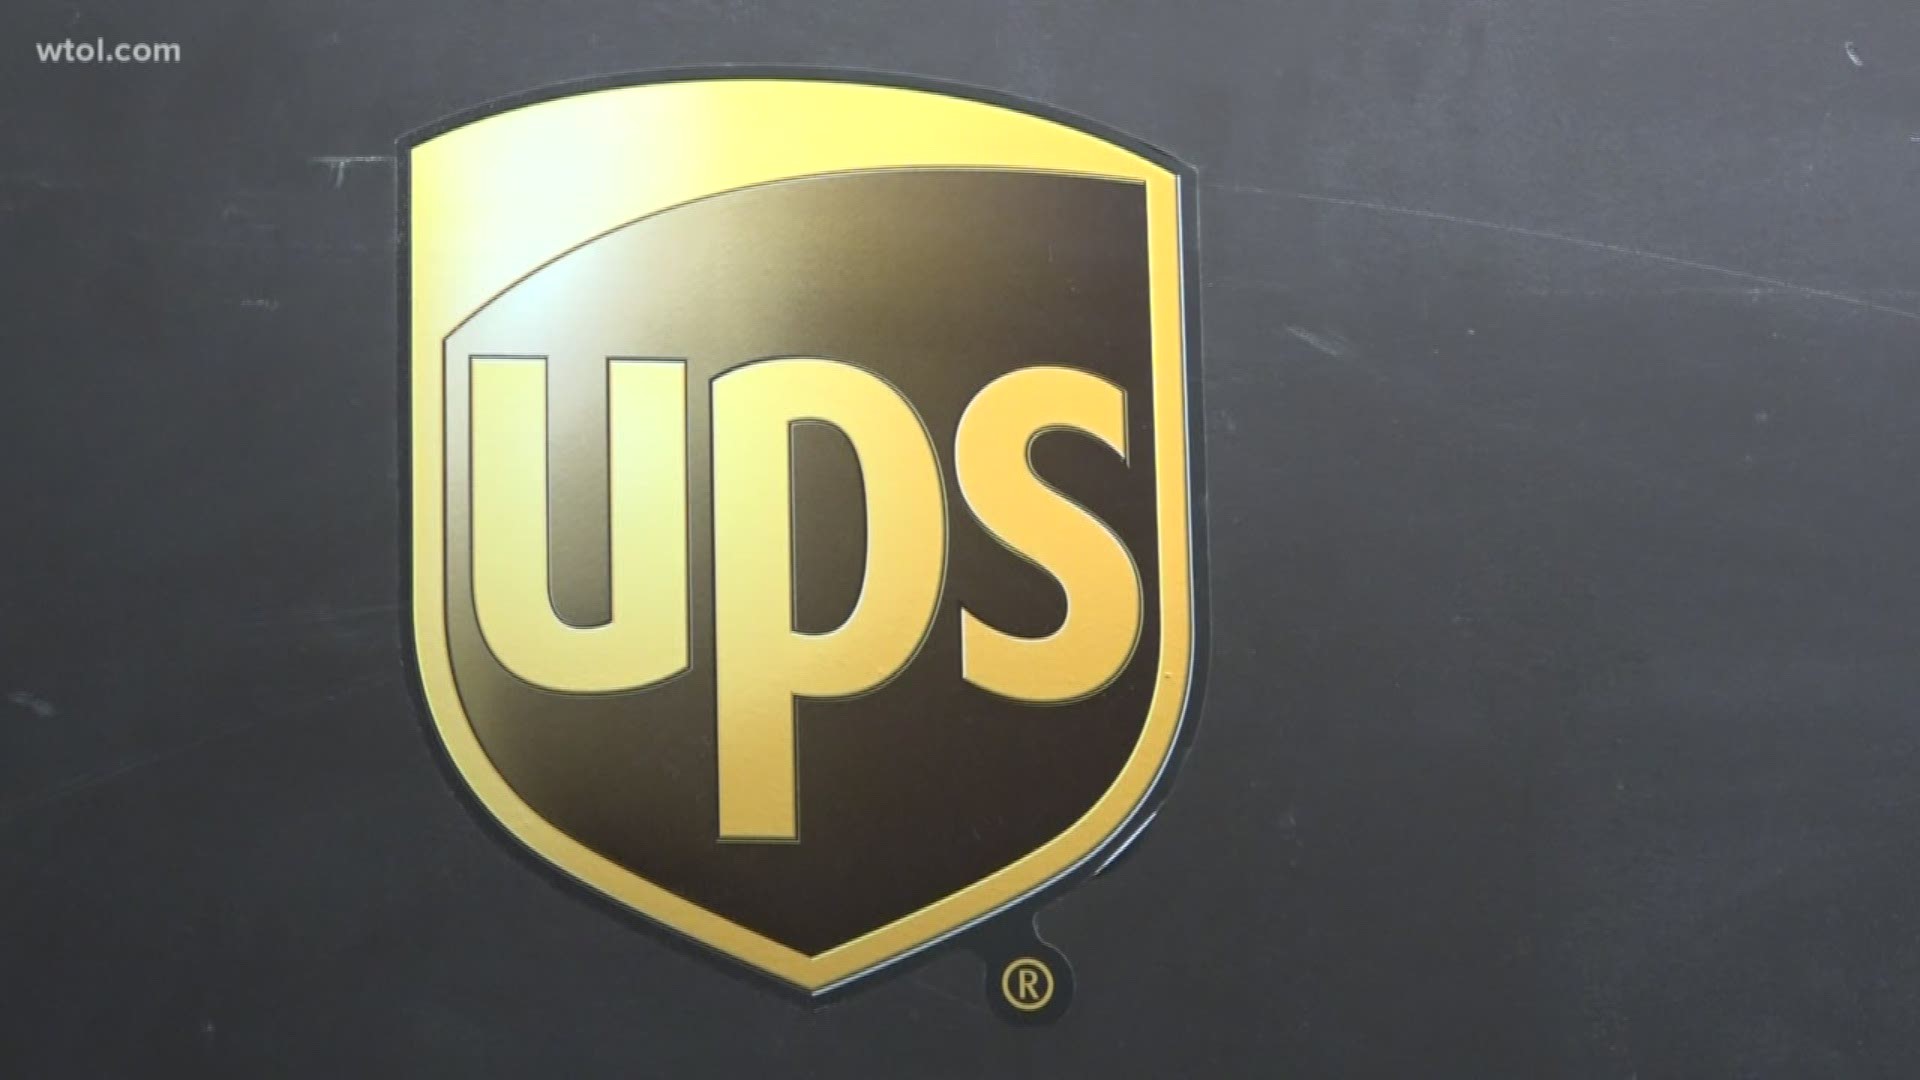 Those openings are among the 100,000 seasonal jobs UPS will be filling across the country this holiday season.